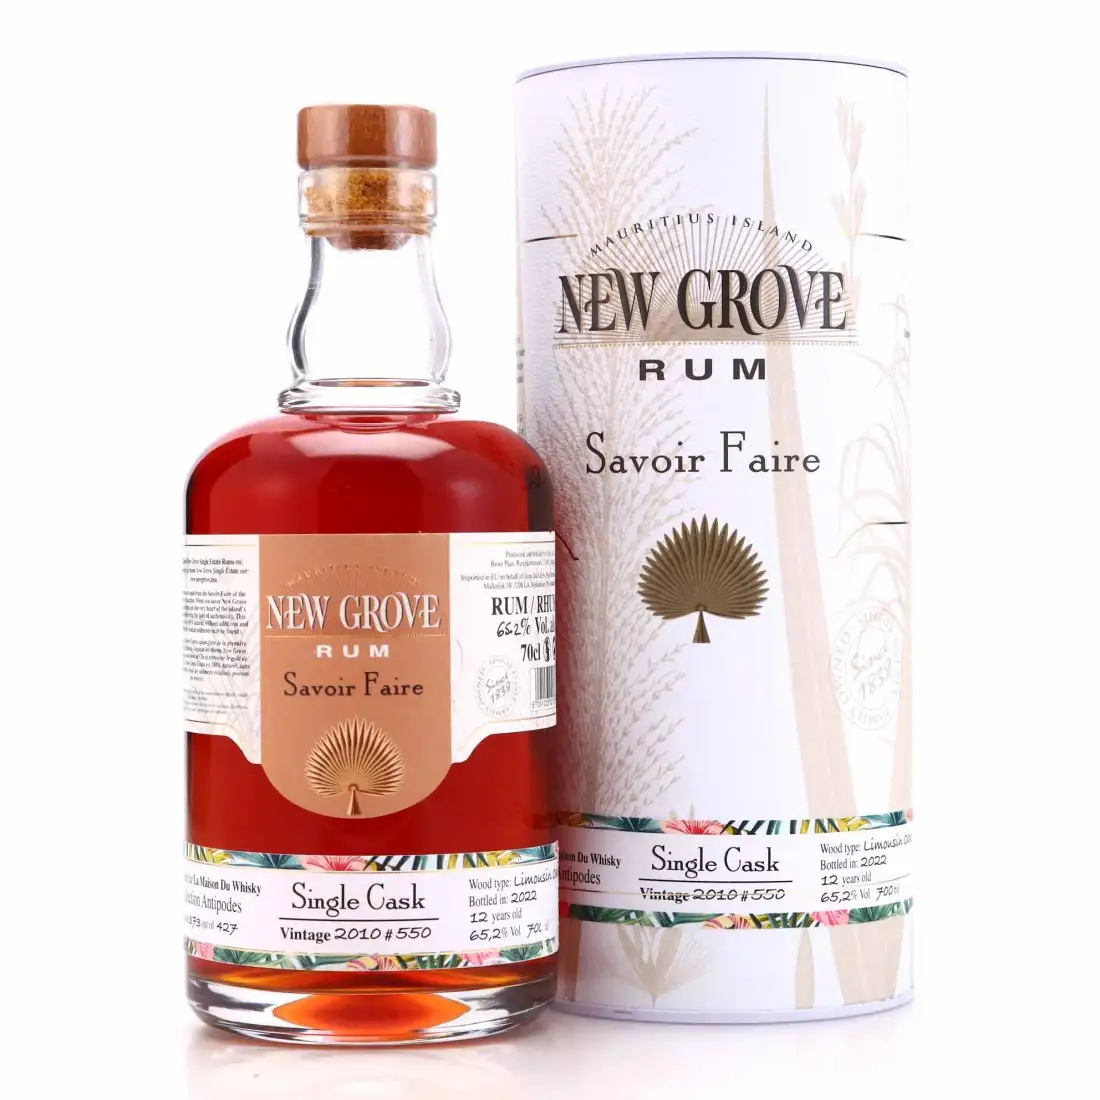 Image of the front of the bottle of the rum New Grove Savoir Faire Single Cask